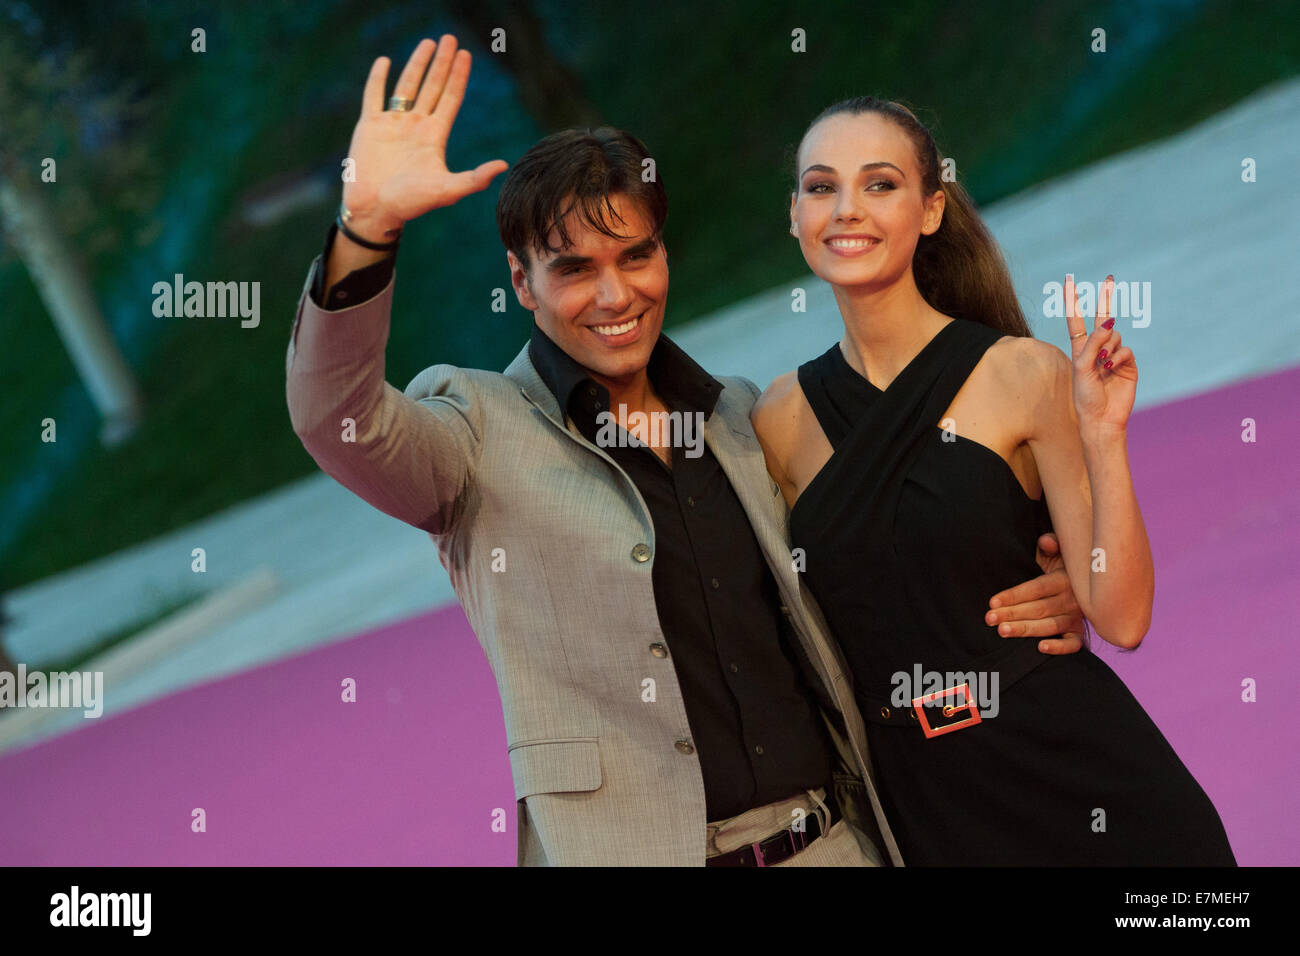 Massimiliano Morra and Adua del Vesco on the Pink carpet. Final evening of Romafictionfest 2014. The 8th edition of the annual festival was held at Auditorium Parco Della Musica. Stock Photo